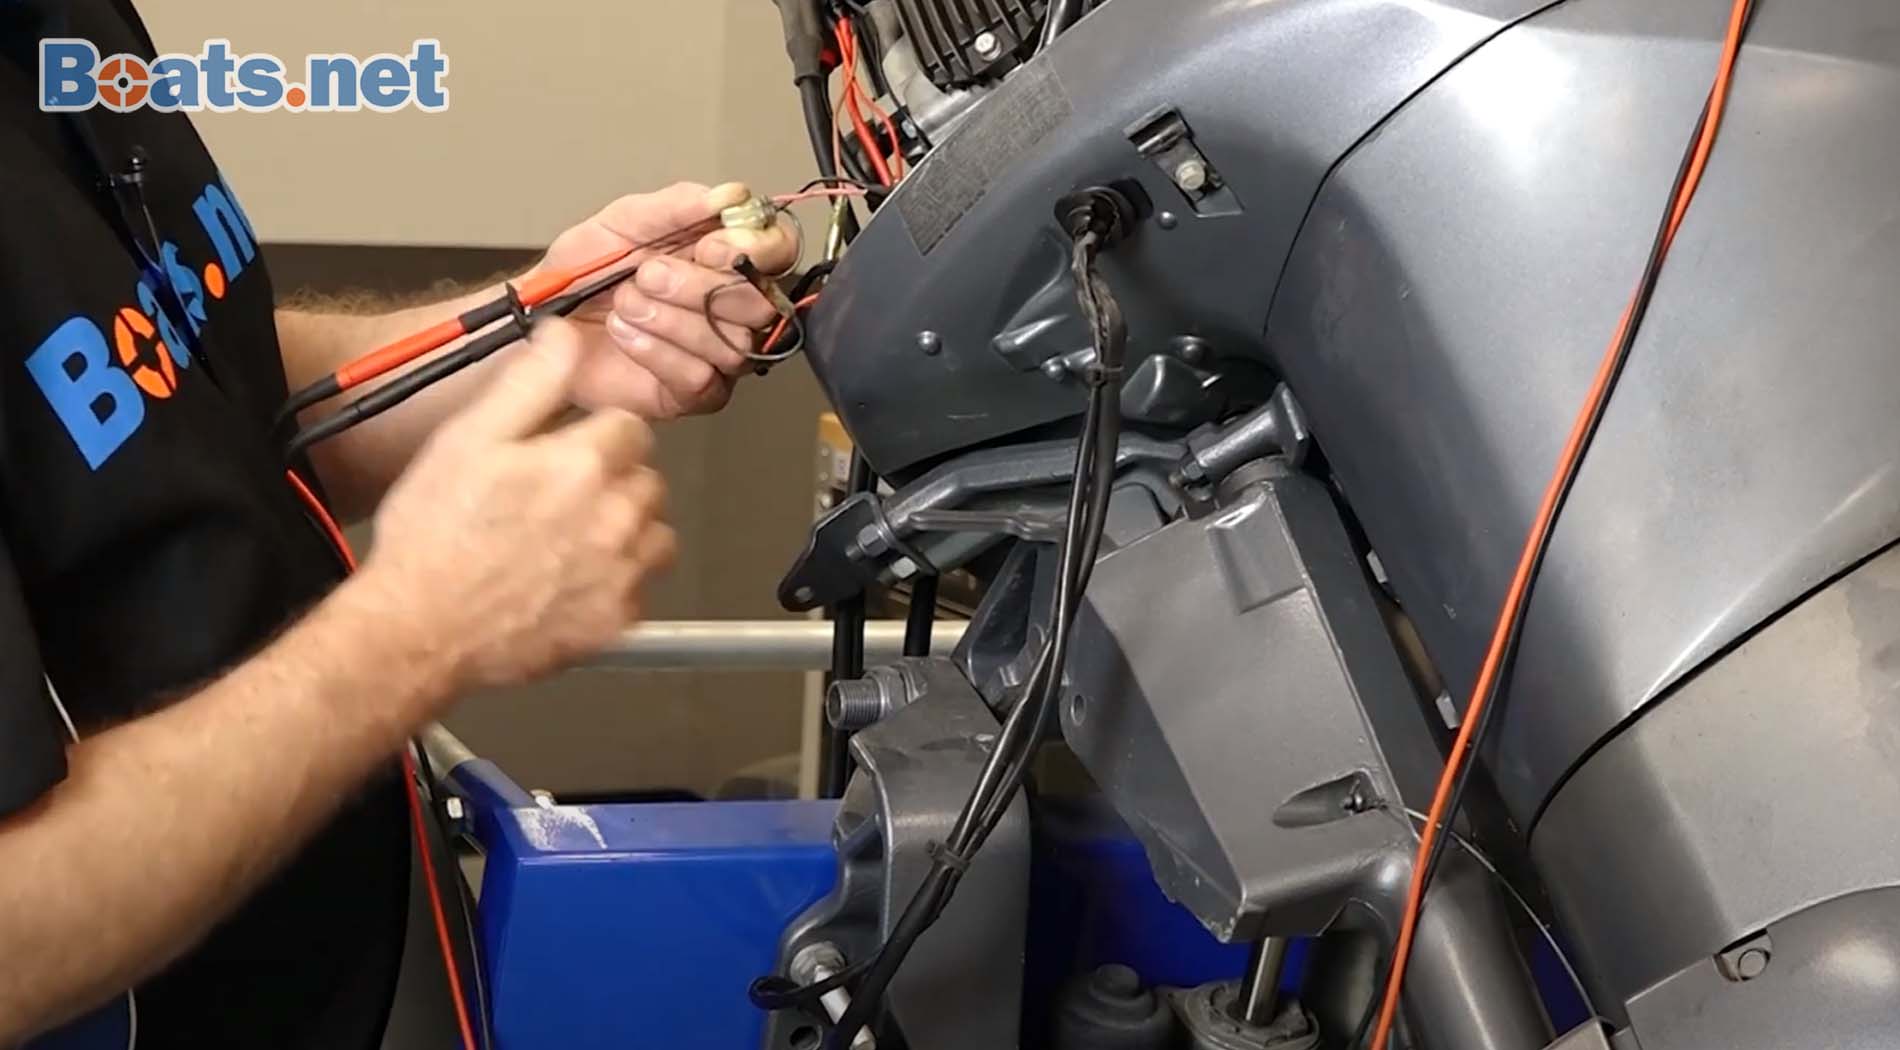 Outboard ignition system troubleshooting tilt killswitch